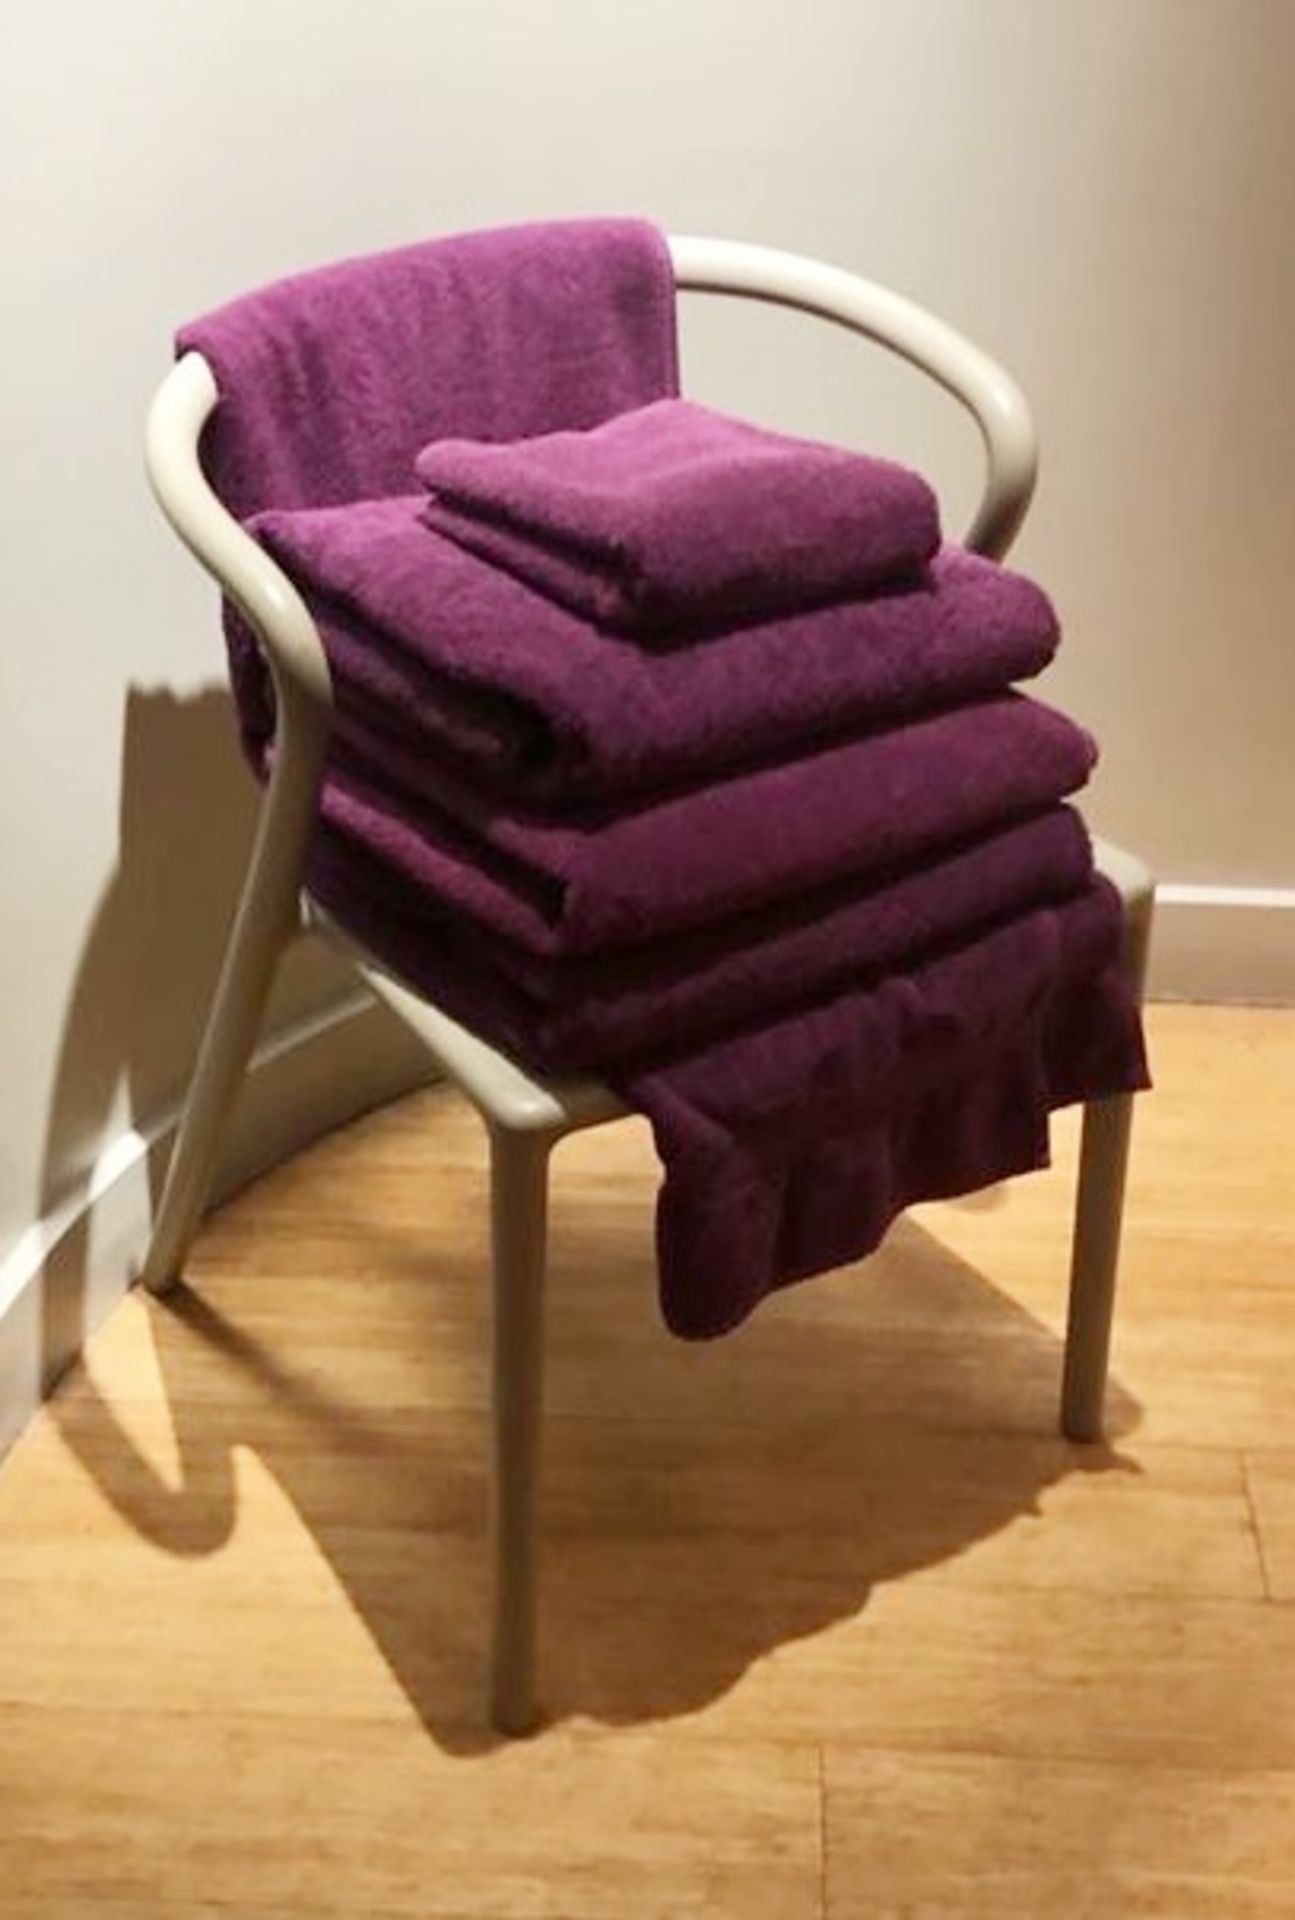 40 x Majestic Luxury 620gsm Bath Towels in Purple - Size SMALL - RRP £240 - CL587 - Location: Altrin - Image 2 of 4